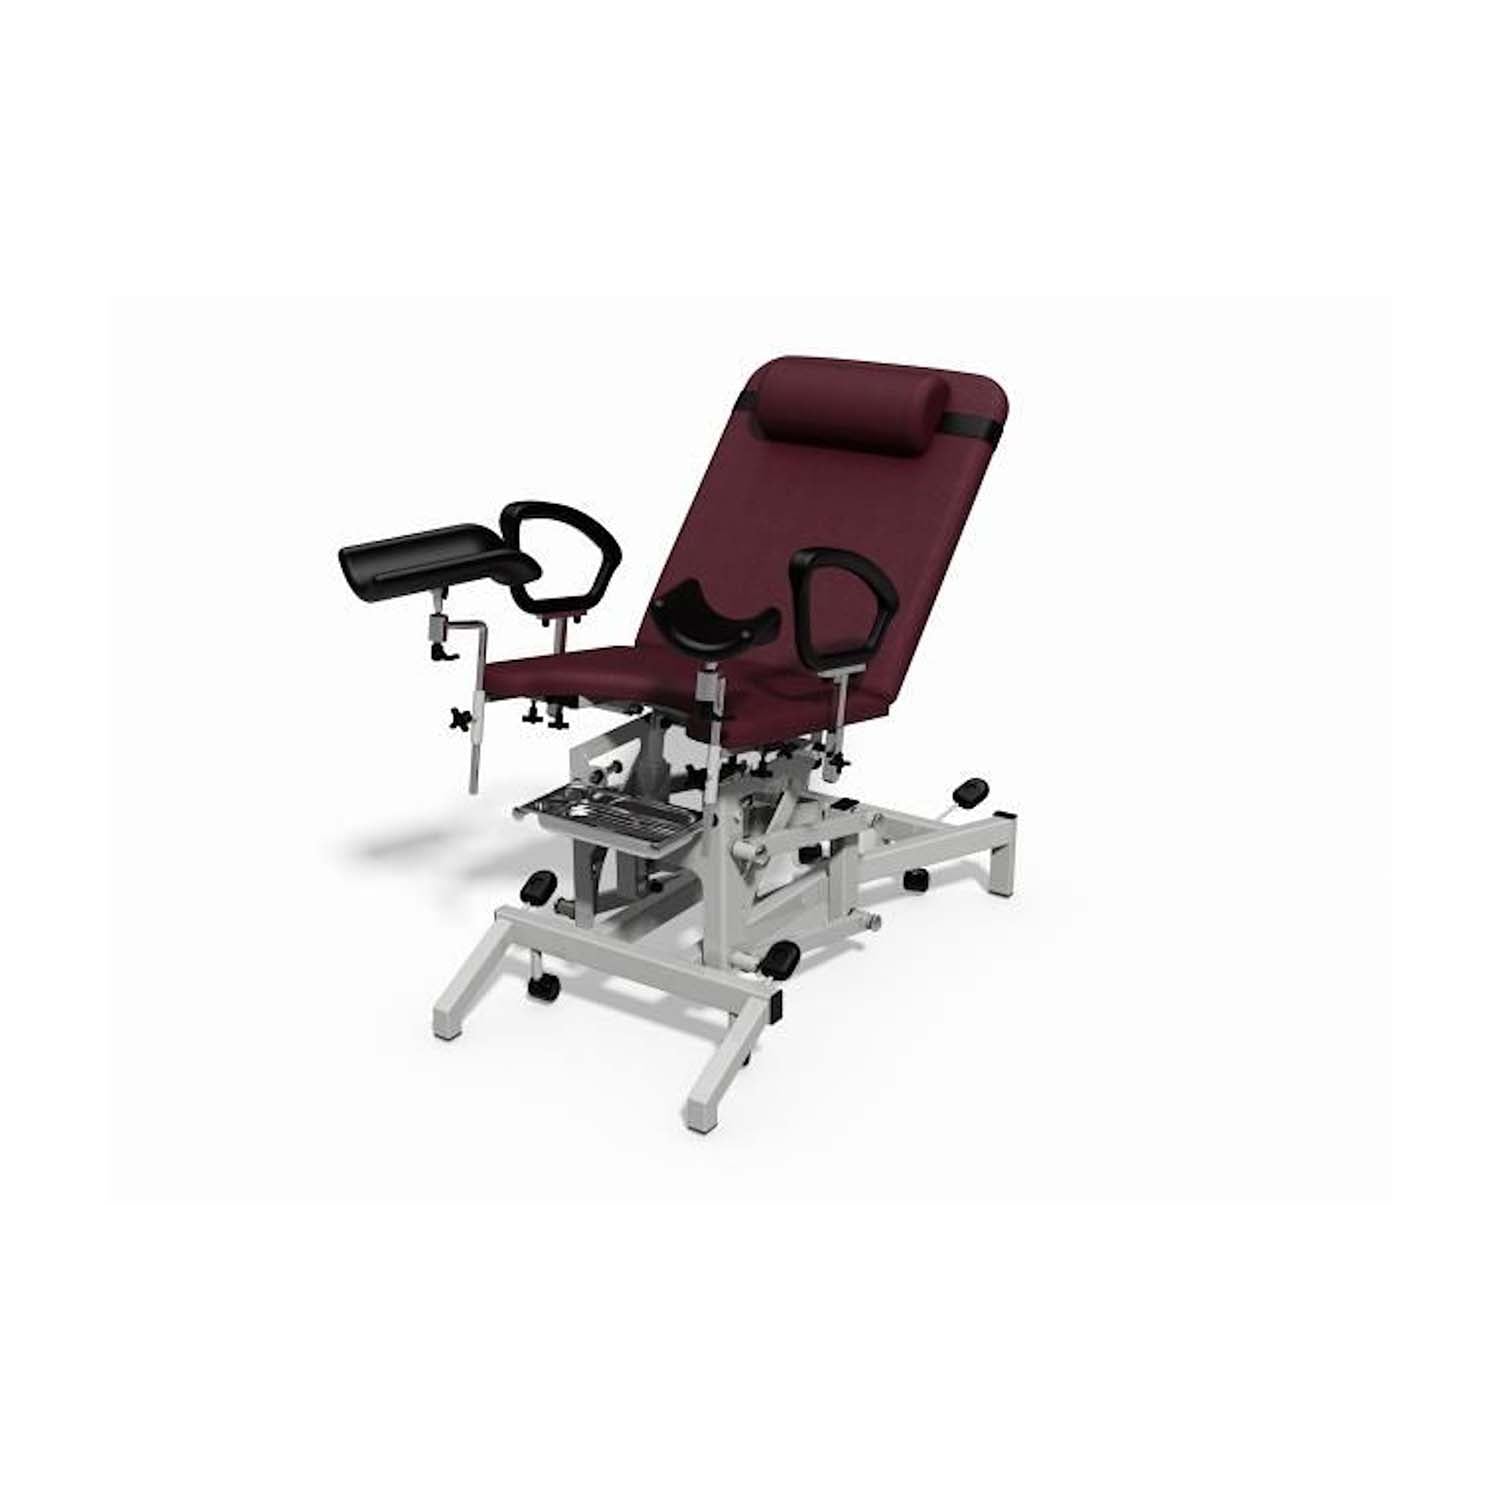 Plinth 2000 Model 93G Gynaecology Chair 3 Motor | Mulled Wine